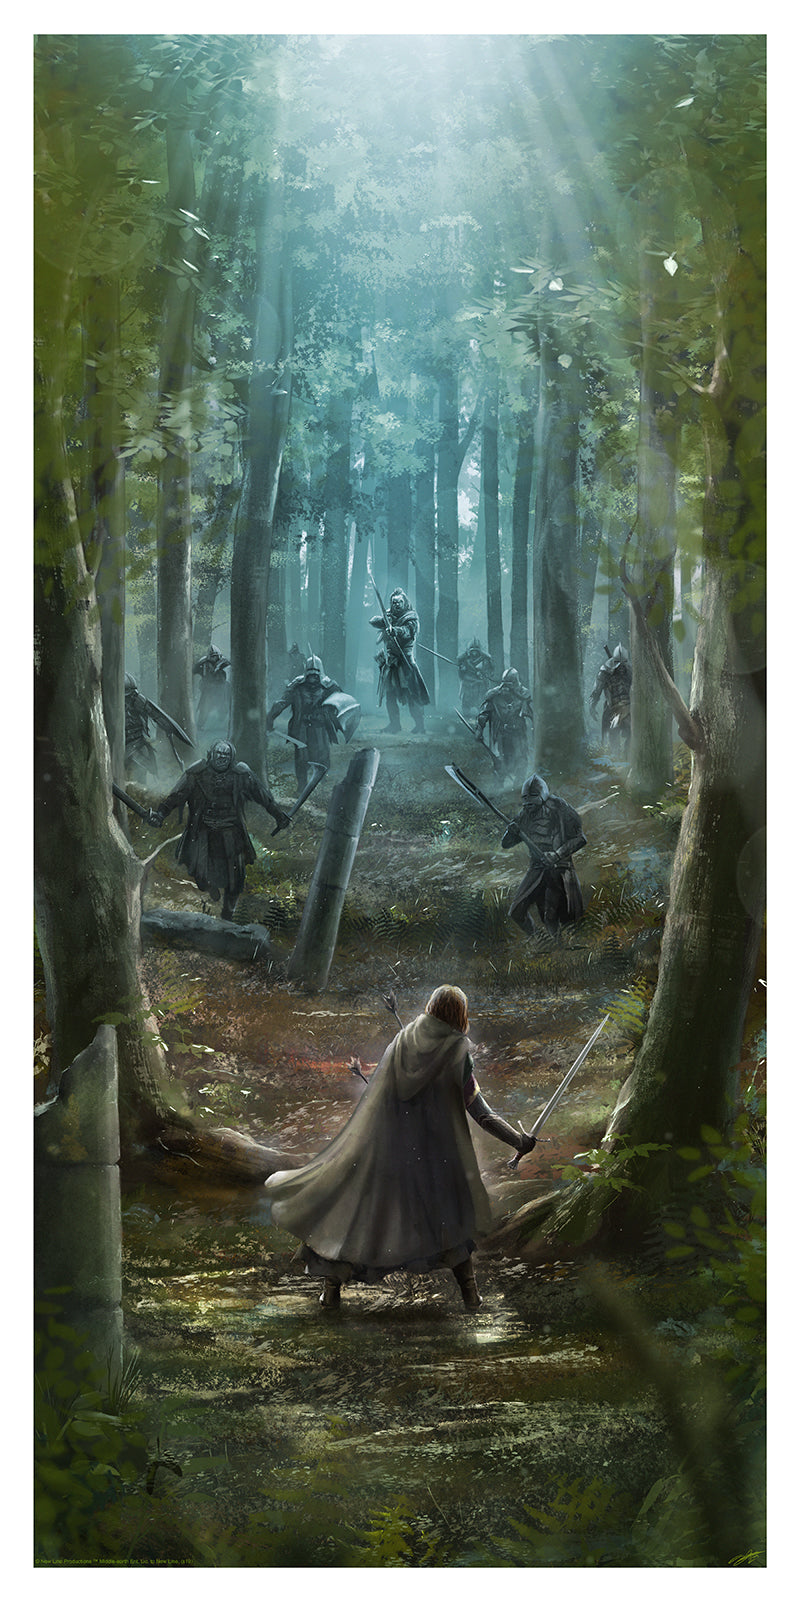 Andy Fairhurst "The Lord of the Rings" SET